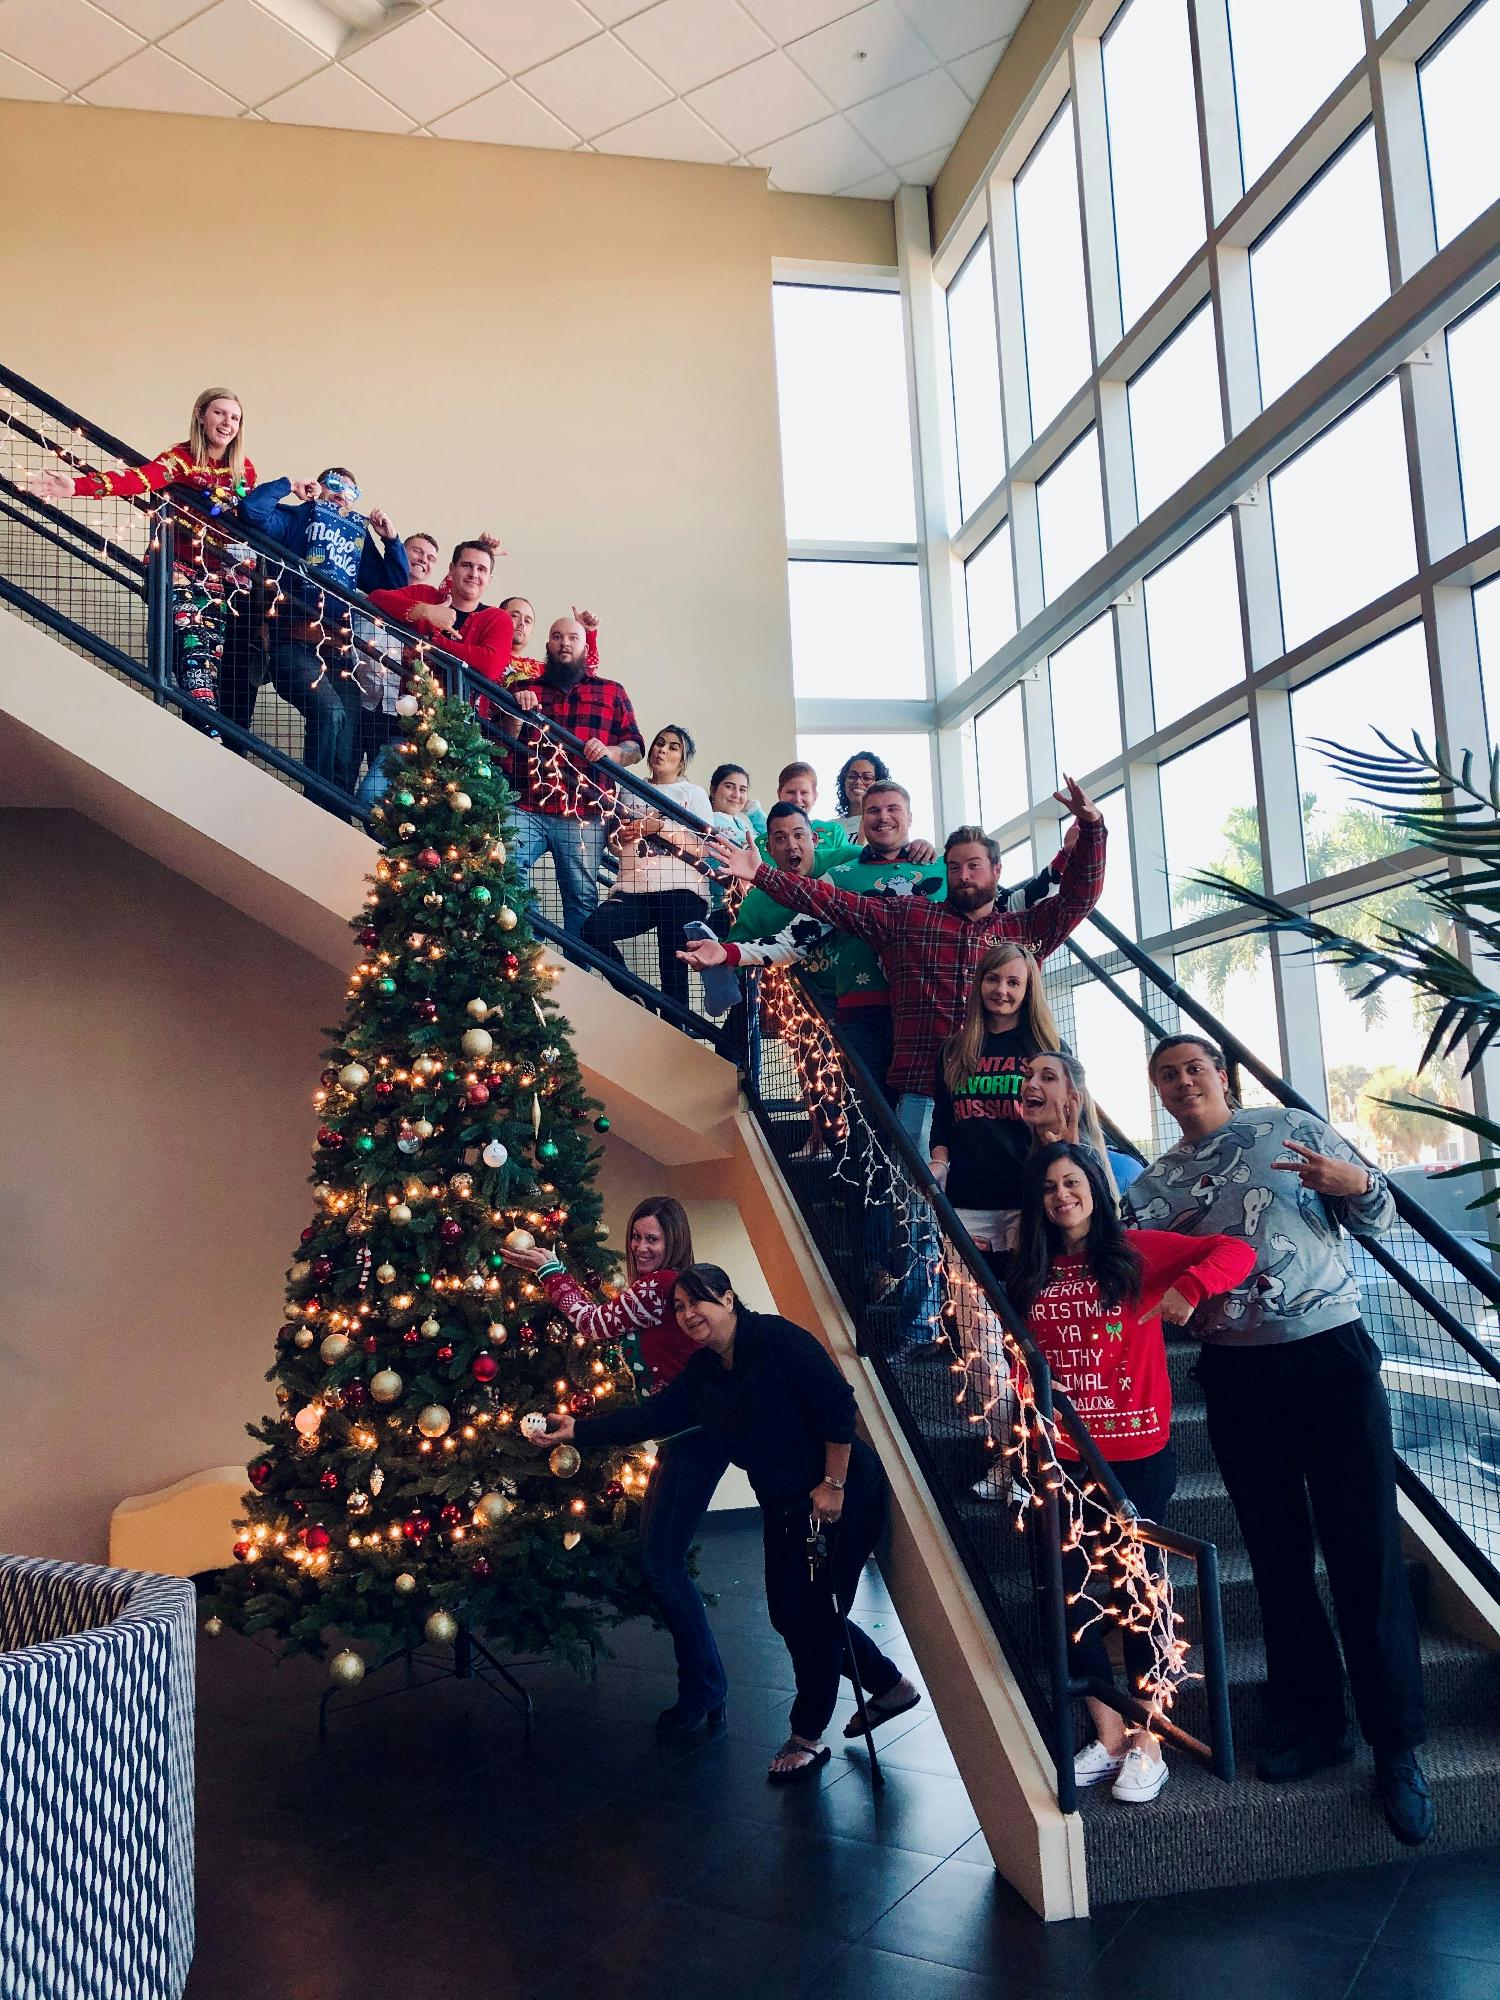 Our 2019 Christmas sweater celebration.